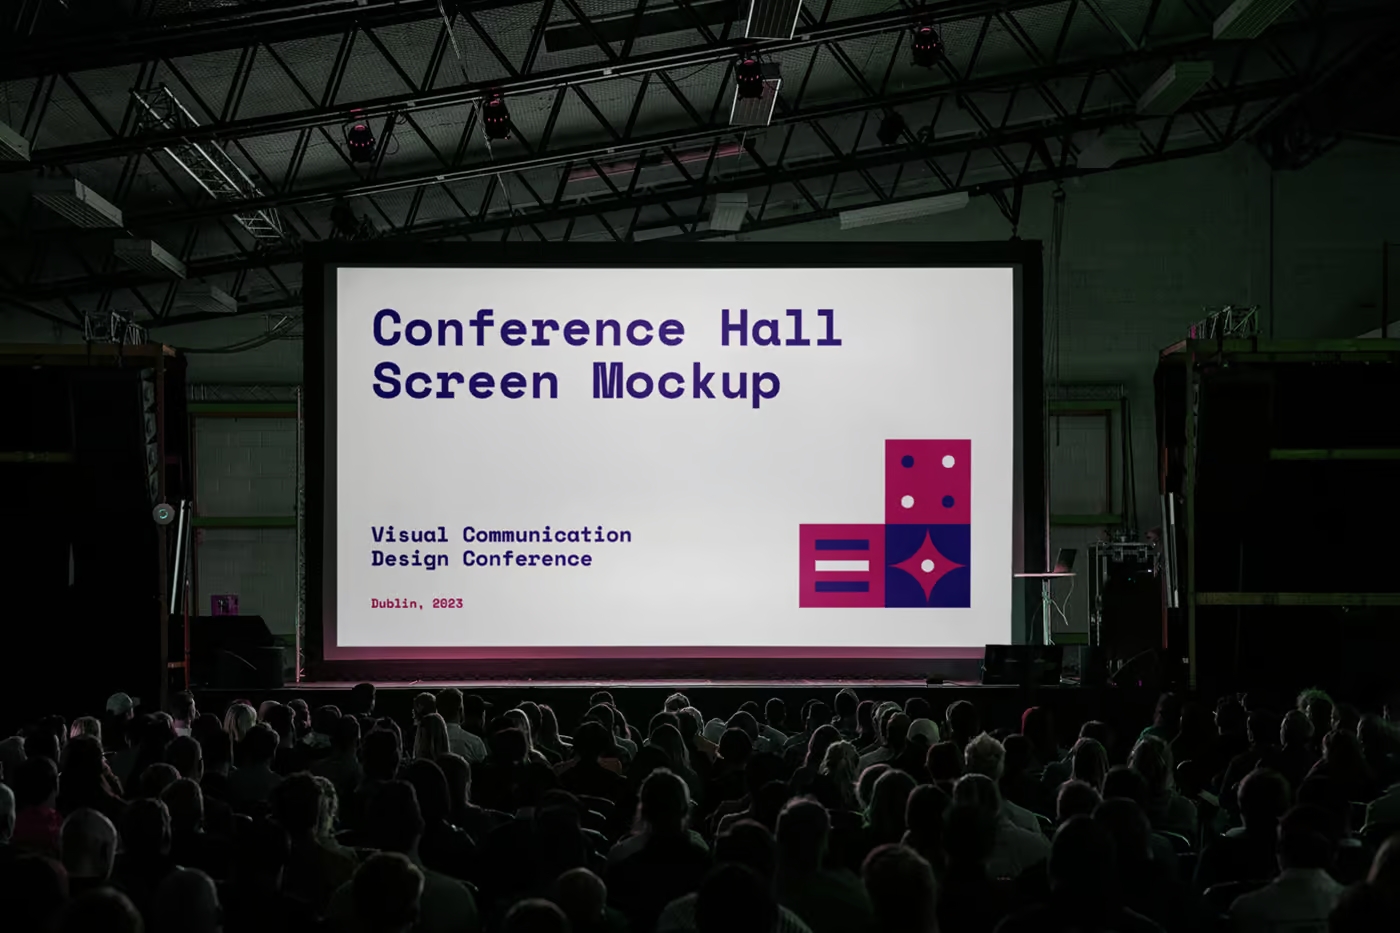 Conference Hall Screen Mockup (Photoshop)